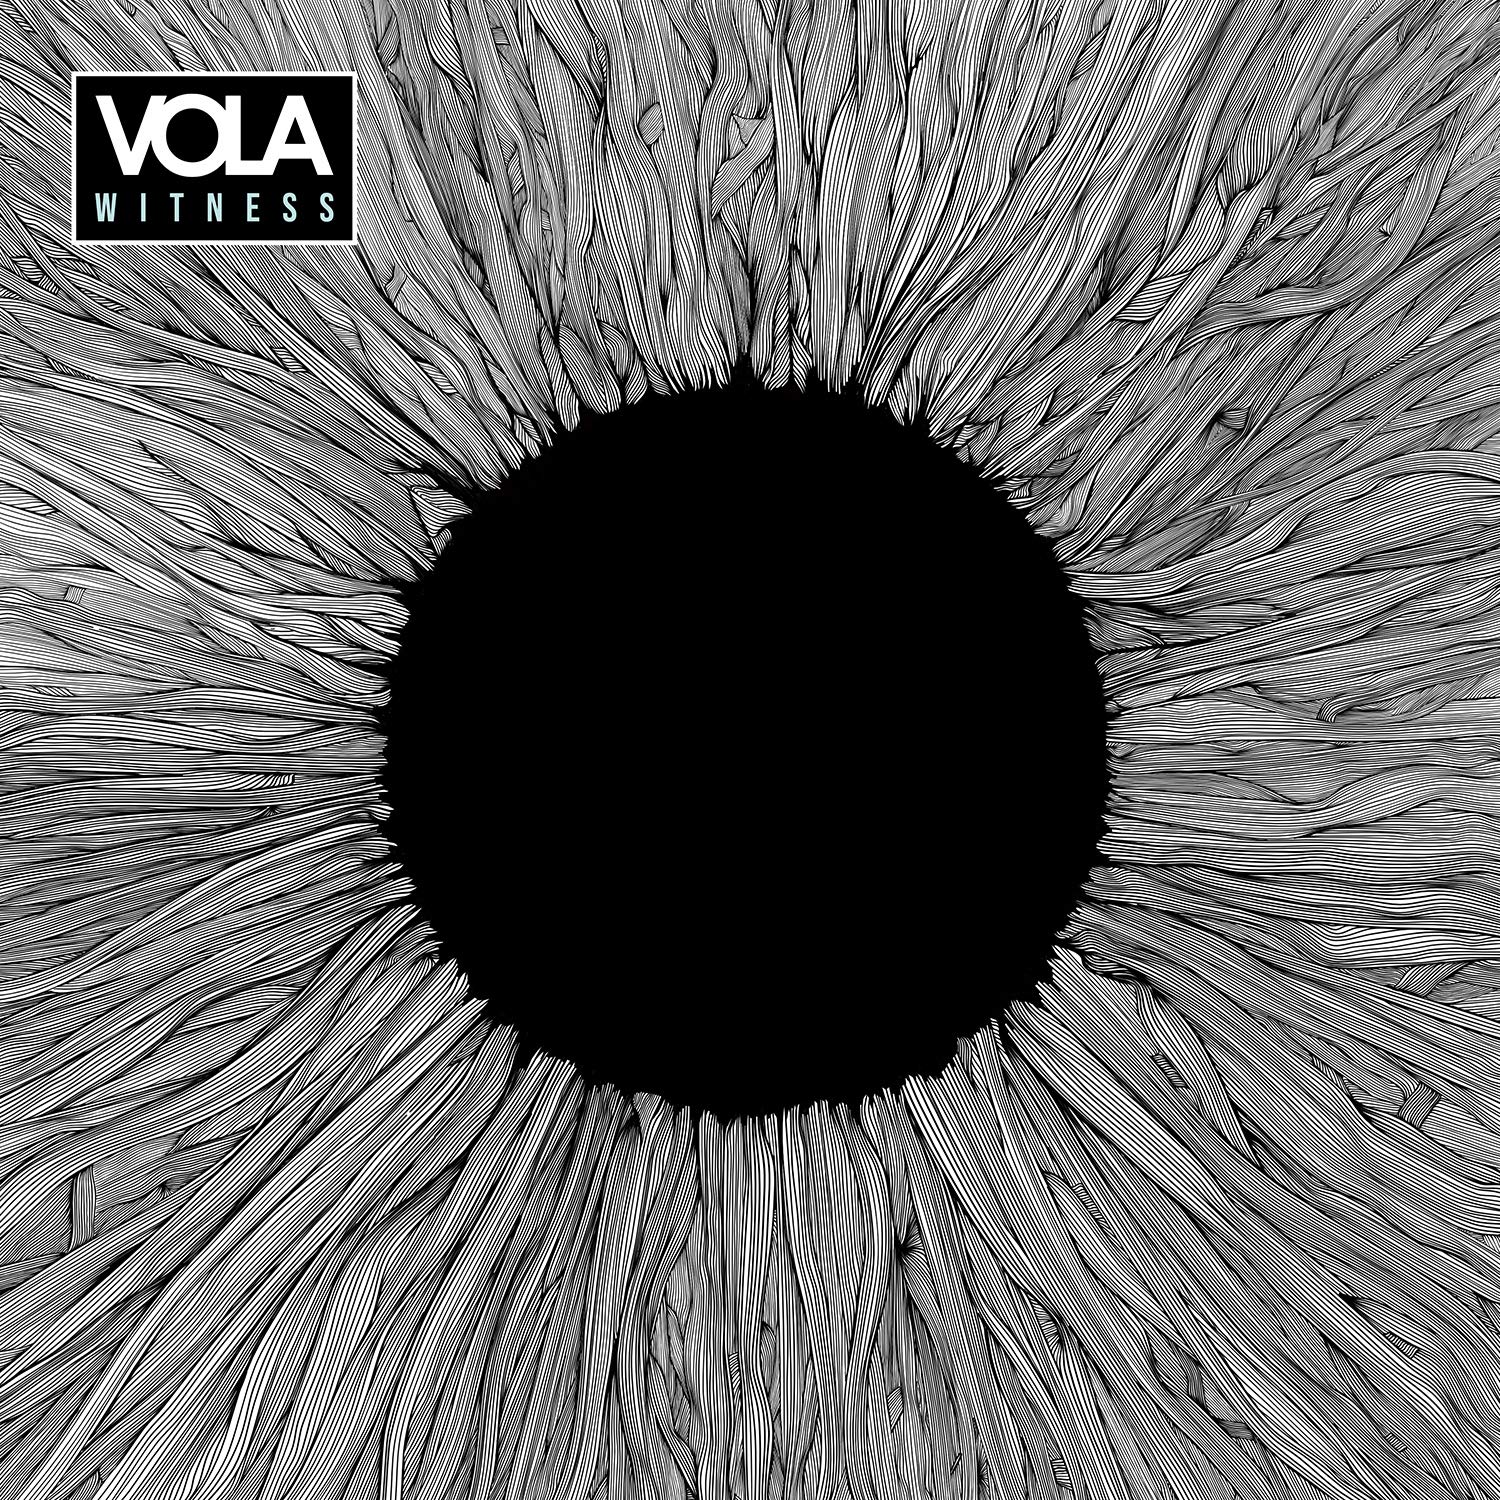 vola-witness-cover-2021.jpeg